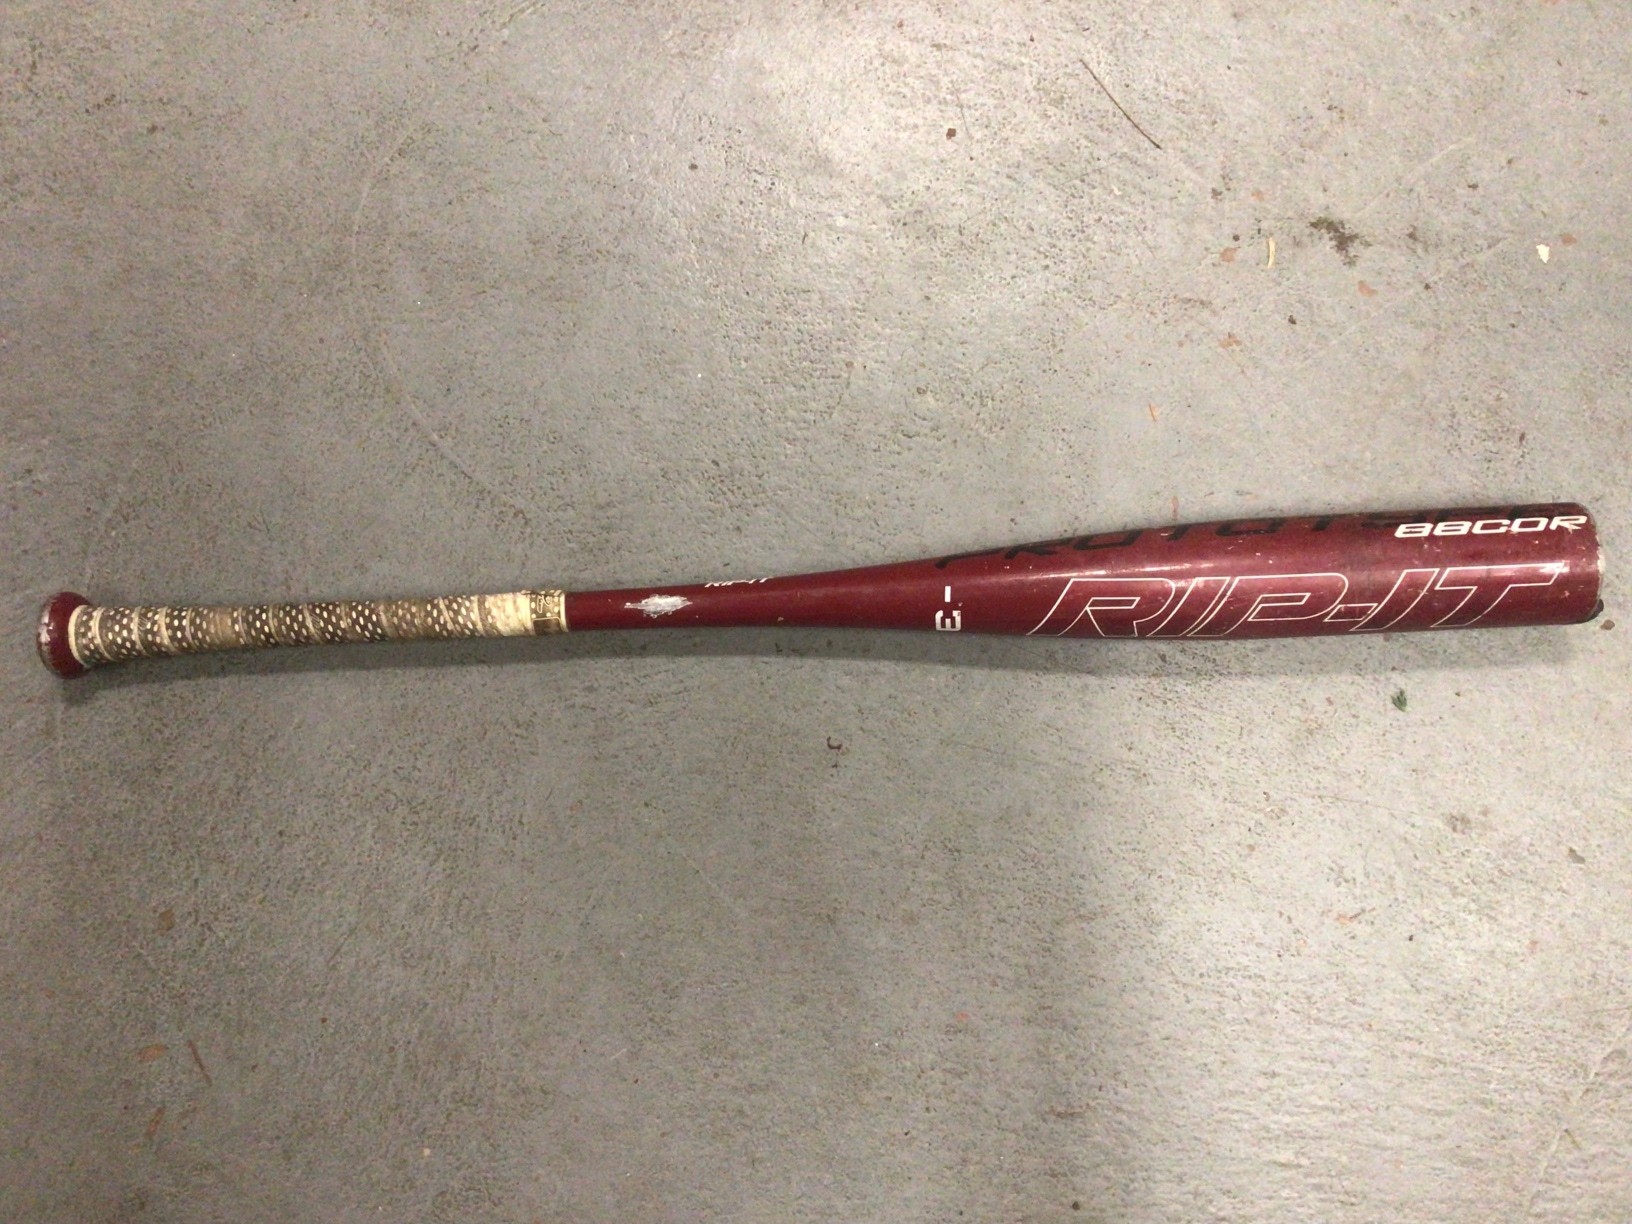 Used BBCOR Certified 2013 Rip It Alloy Prototype Bat (-3) 30 oz 33"